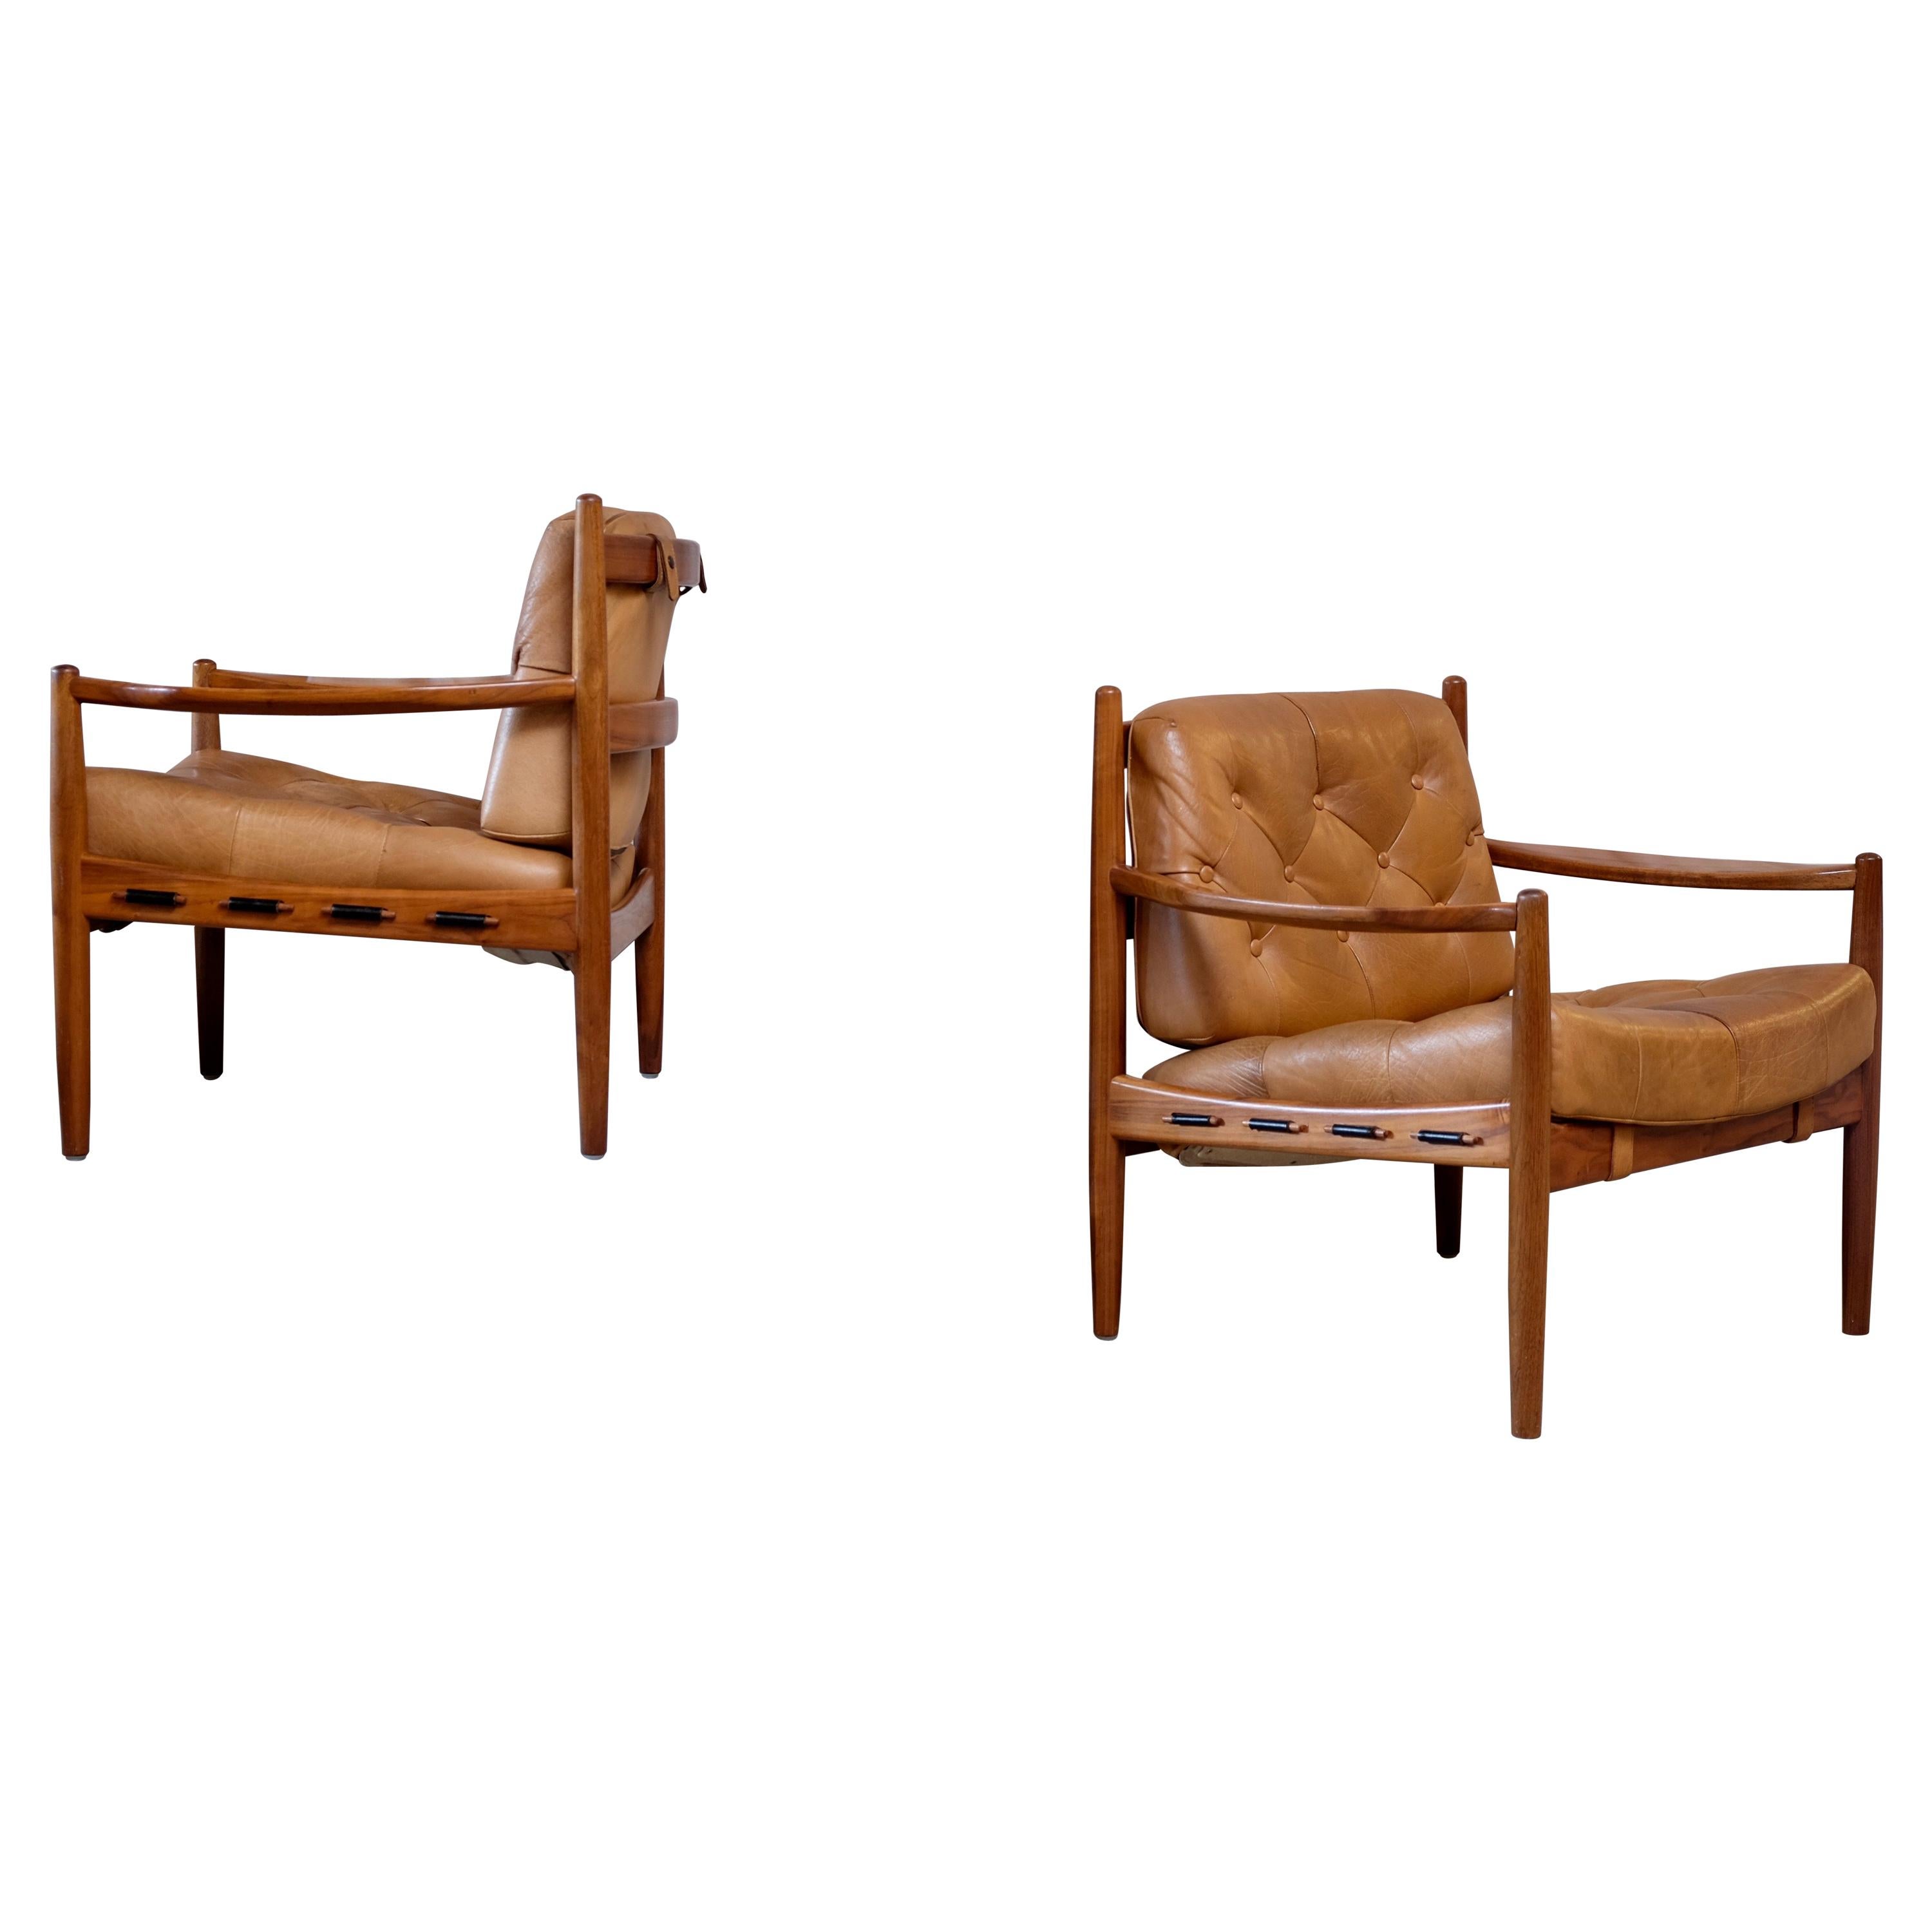 Pair of Cognac Leather "Läckö" Easy Chairs by Ingemar Thillmark, 1960s